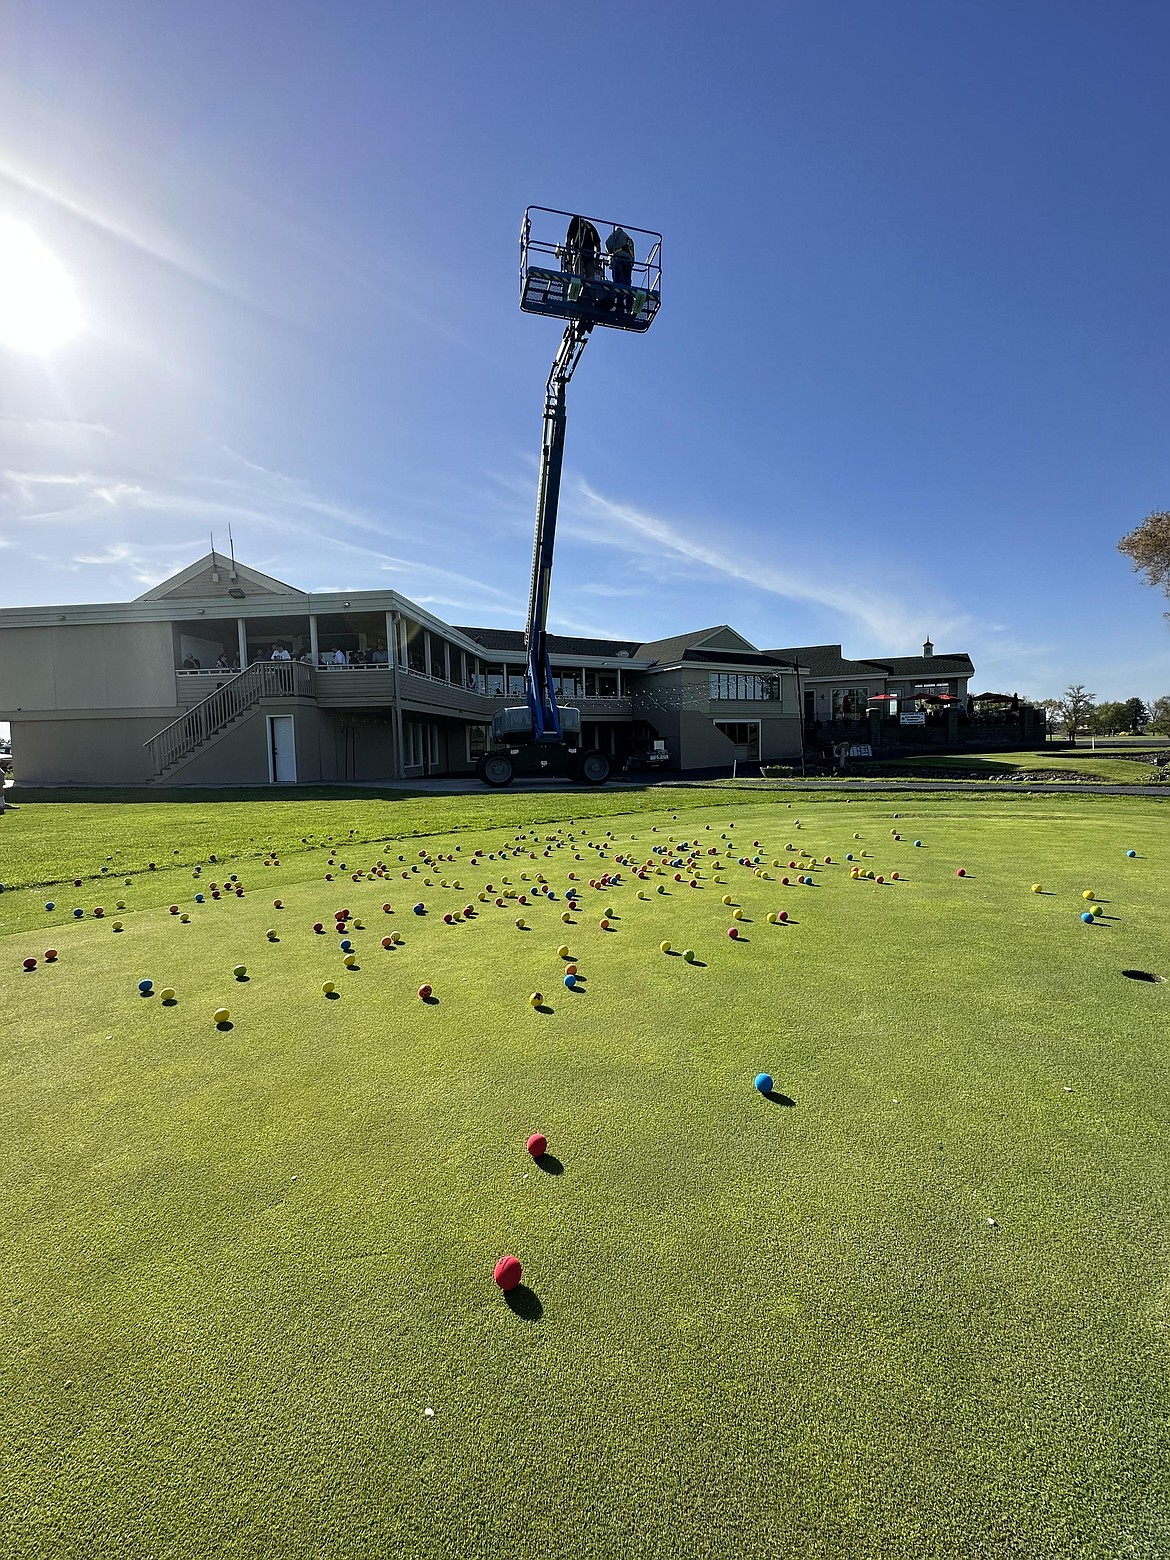 The Great Genie Ball Lift is a side game where board of directors chairman Jim McKiernan drops numerous balls onto a practice green, and the winning ball earns money.